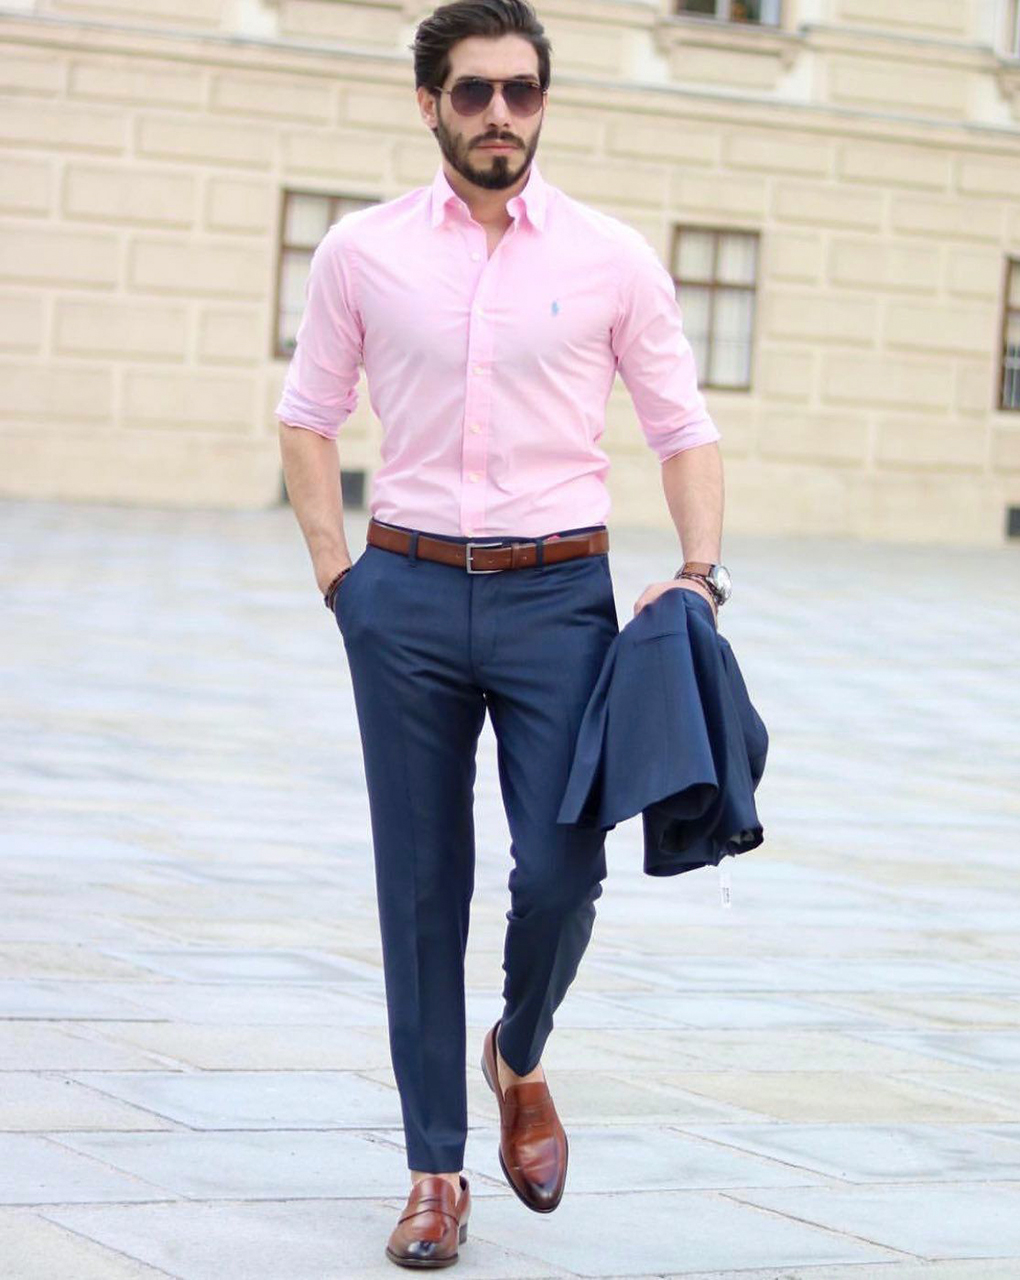 pink shirt, navy blue pants, and brown loafers